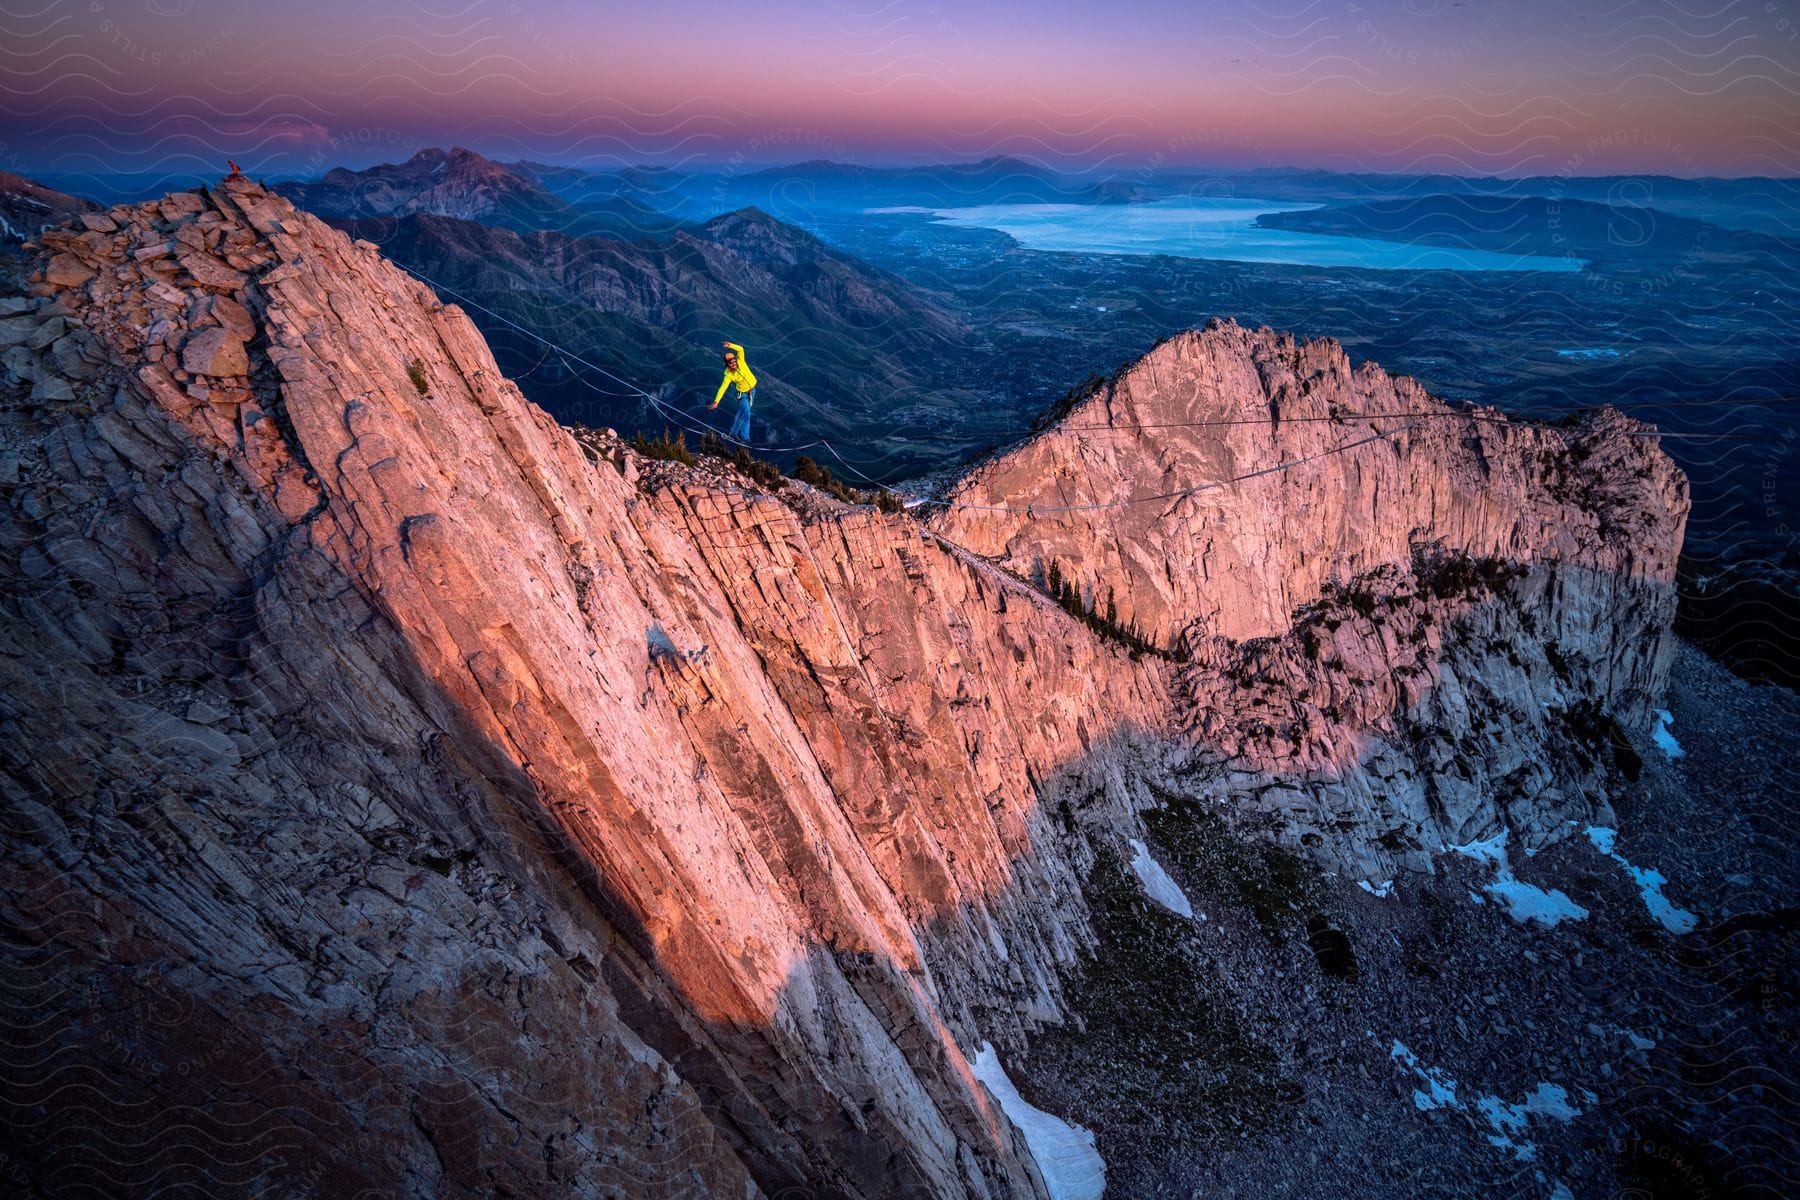 A hiker climbs a steep peak with a serene sunset and calm lake in the background